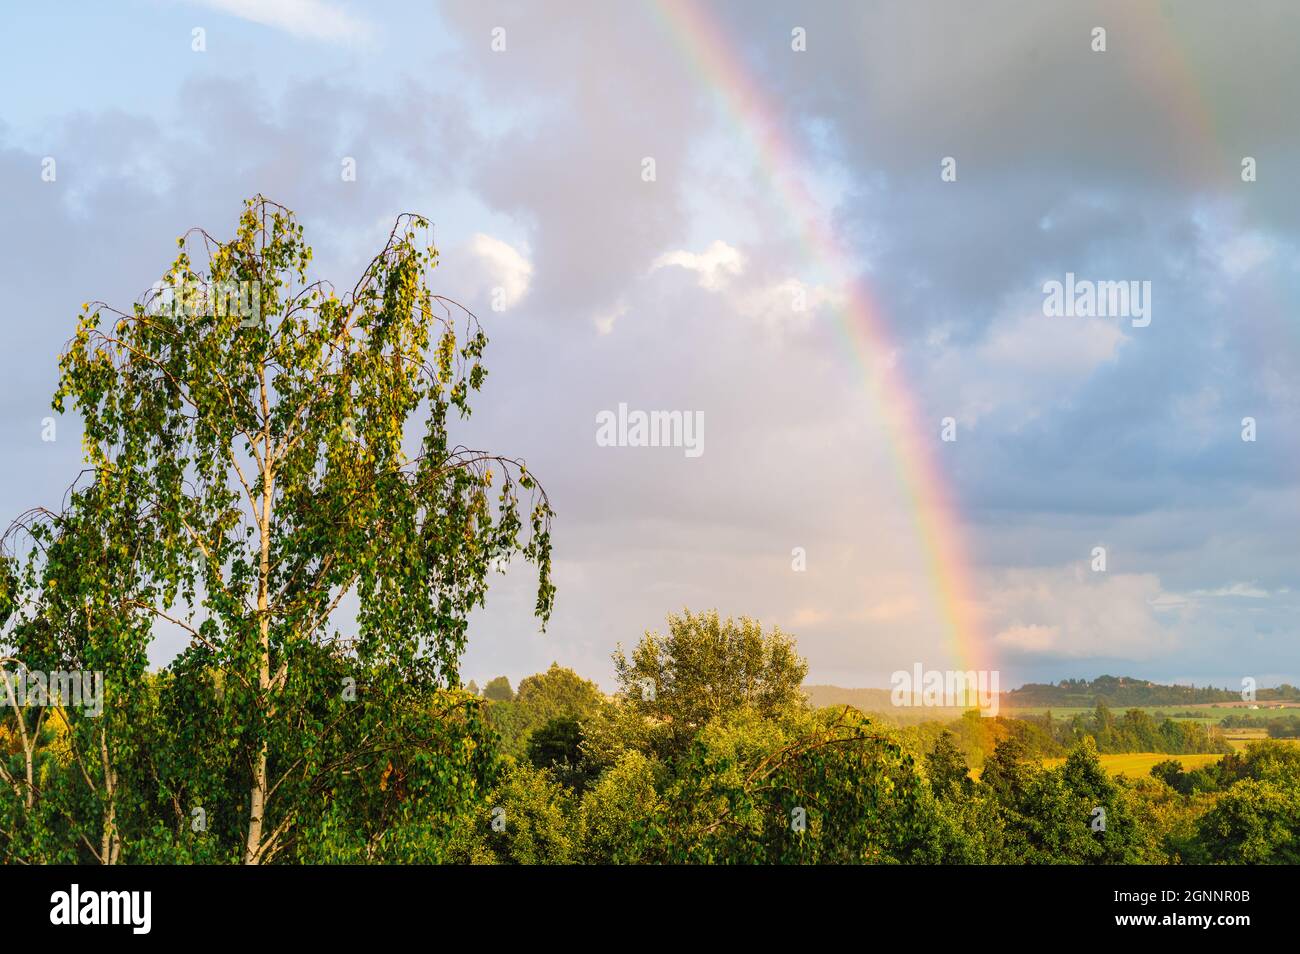 Landscape view with rainbow, green meadows and trees, rain and rainbow in the sky. Stock Photo